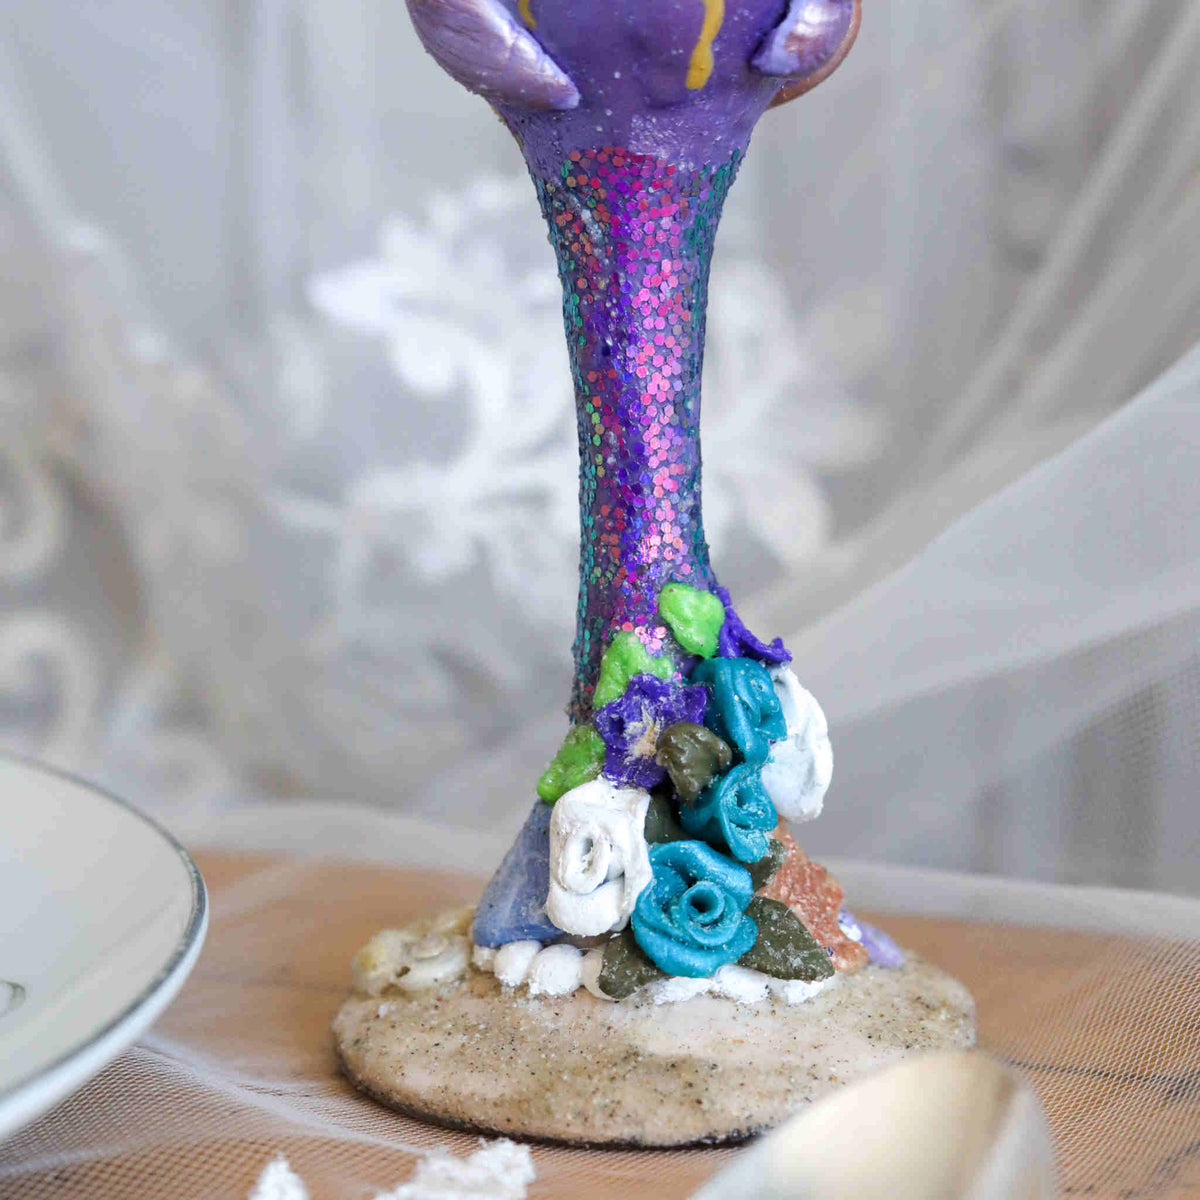 Enjoy the sea and sand while you toast to each other on your special wedding day or wedding anniversary. Each flute is hand-scuplted and painted with purple, teal, and white tiny seashells and flowers using polymer clay and sealed to last.